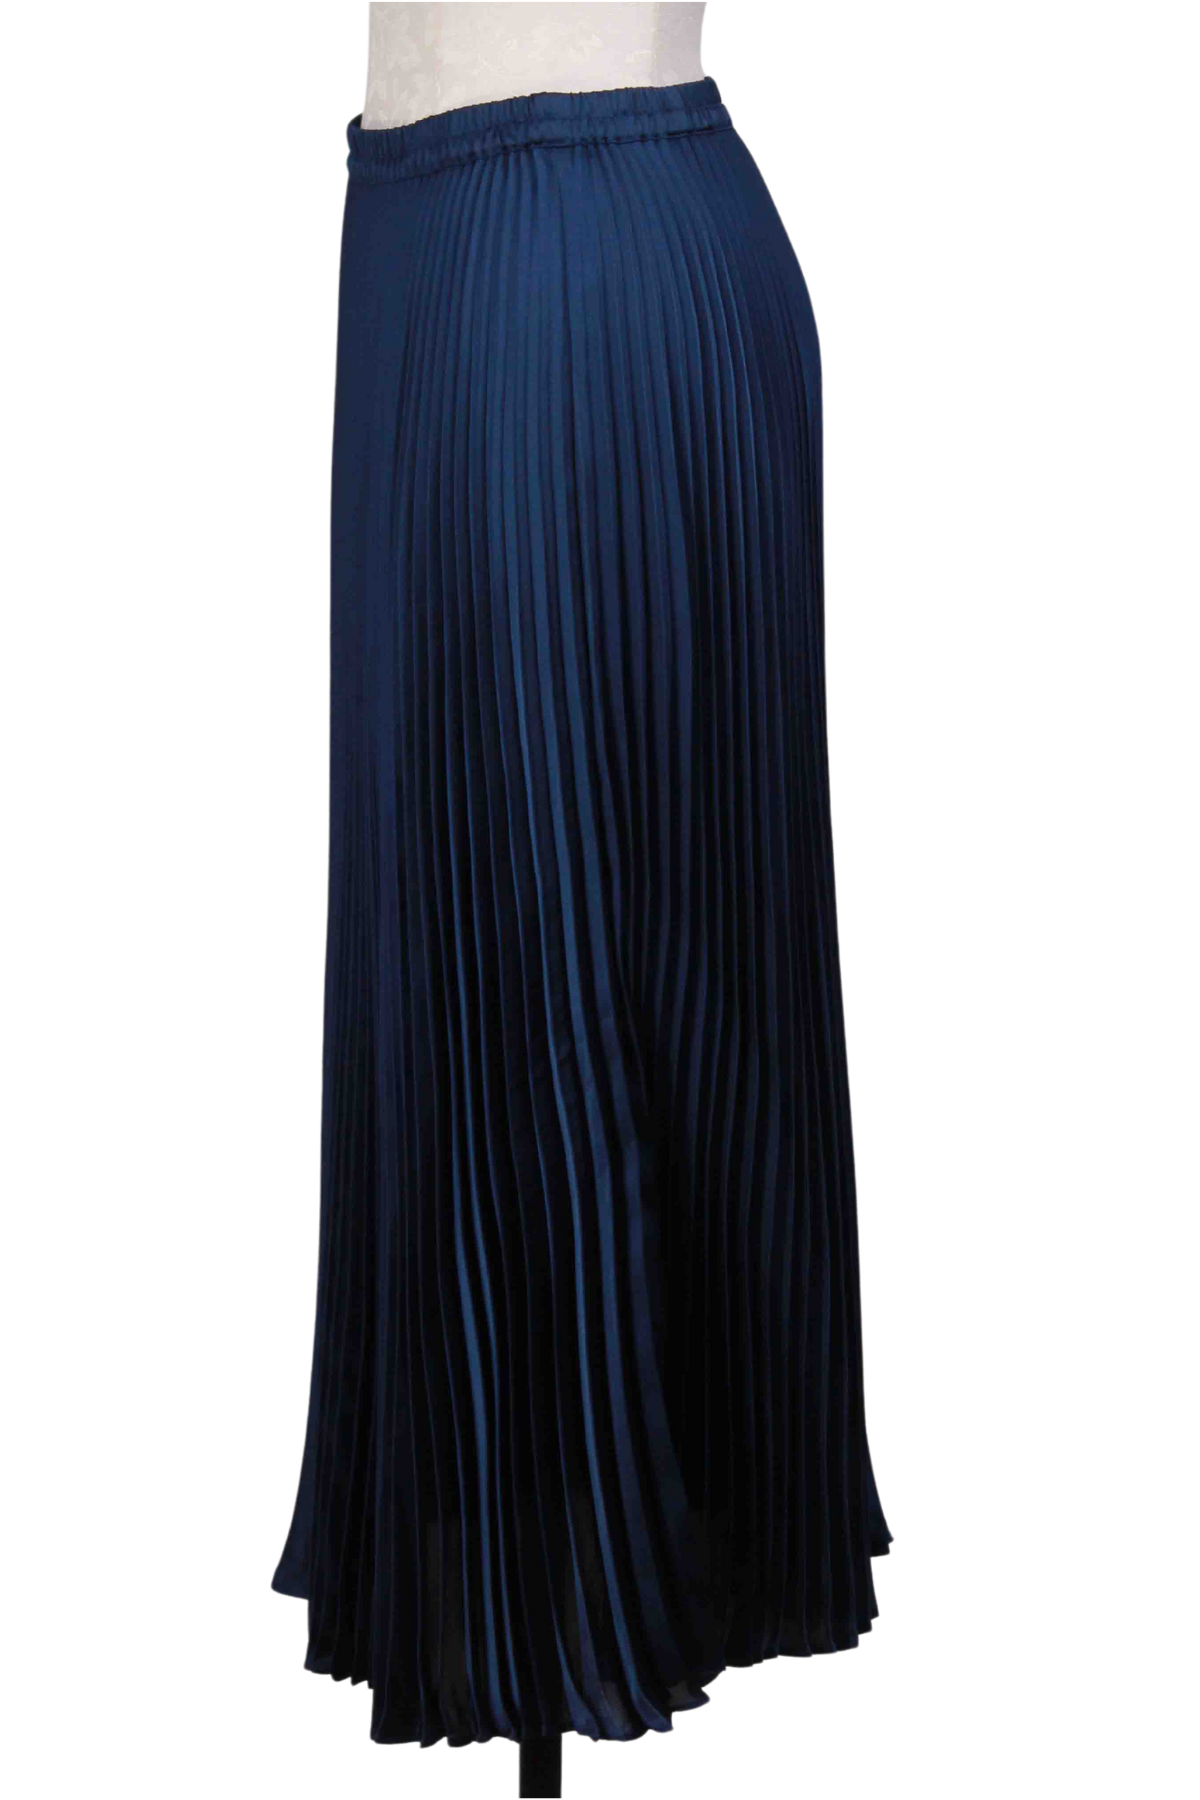 side view of Navy Mia Pleated Skirt by Caballero